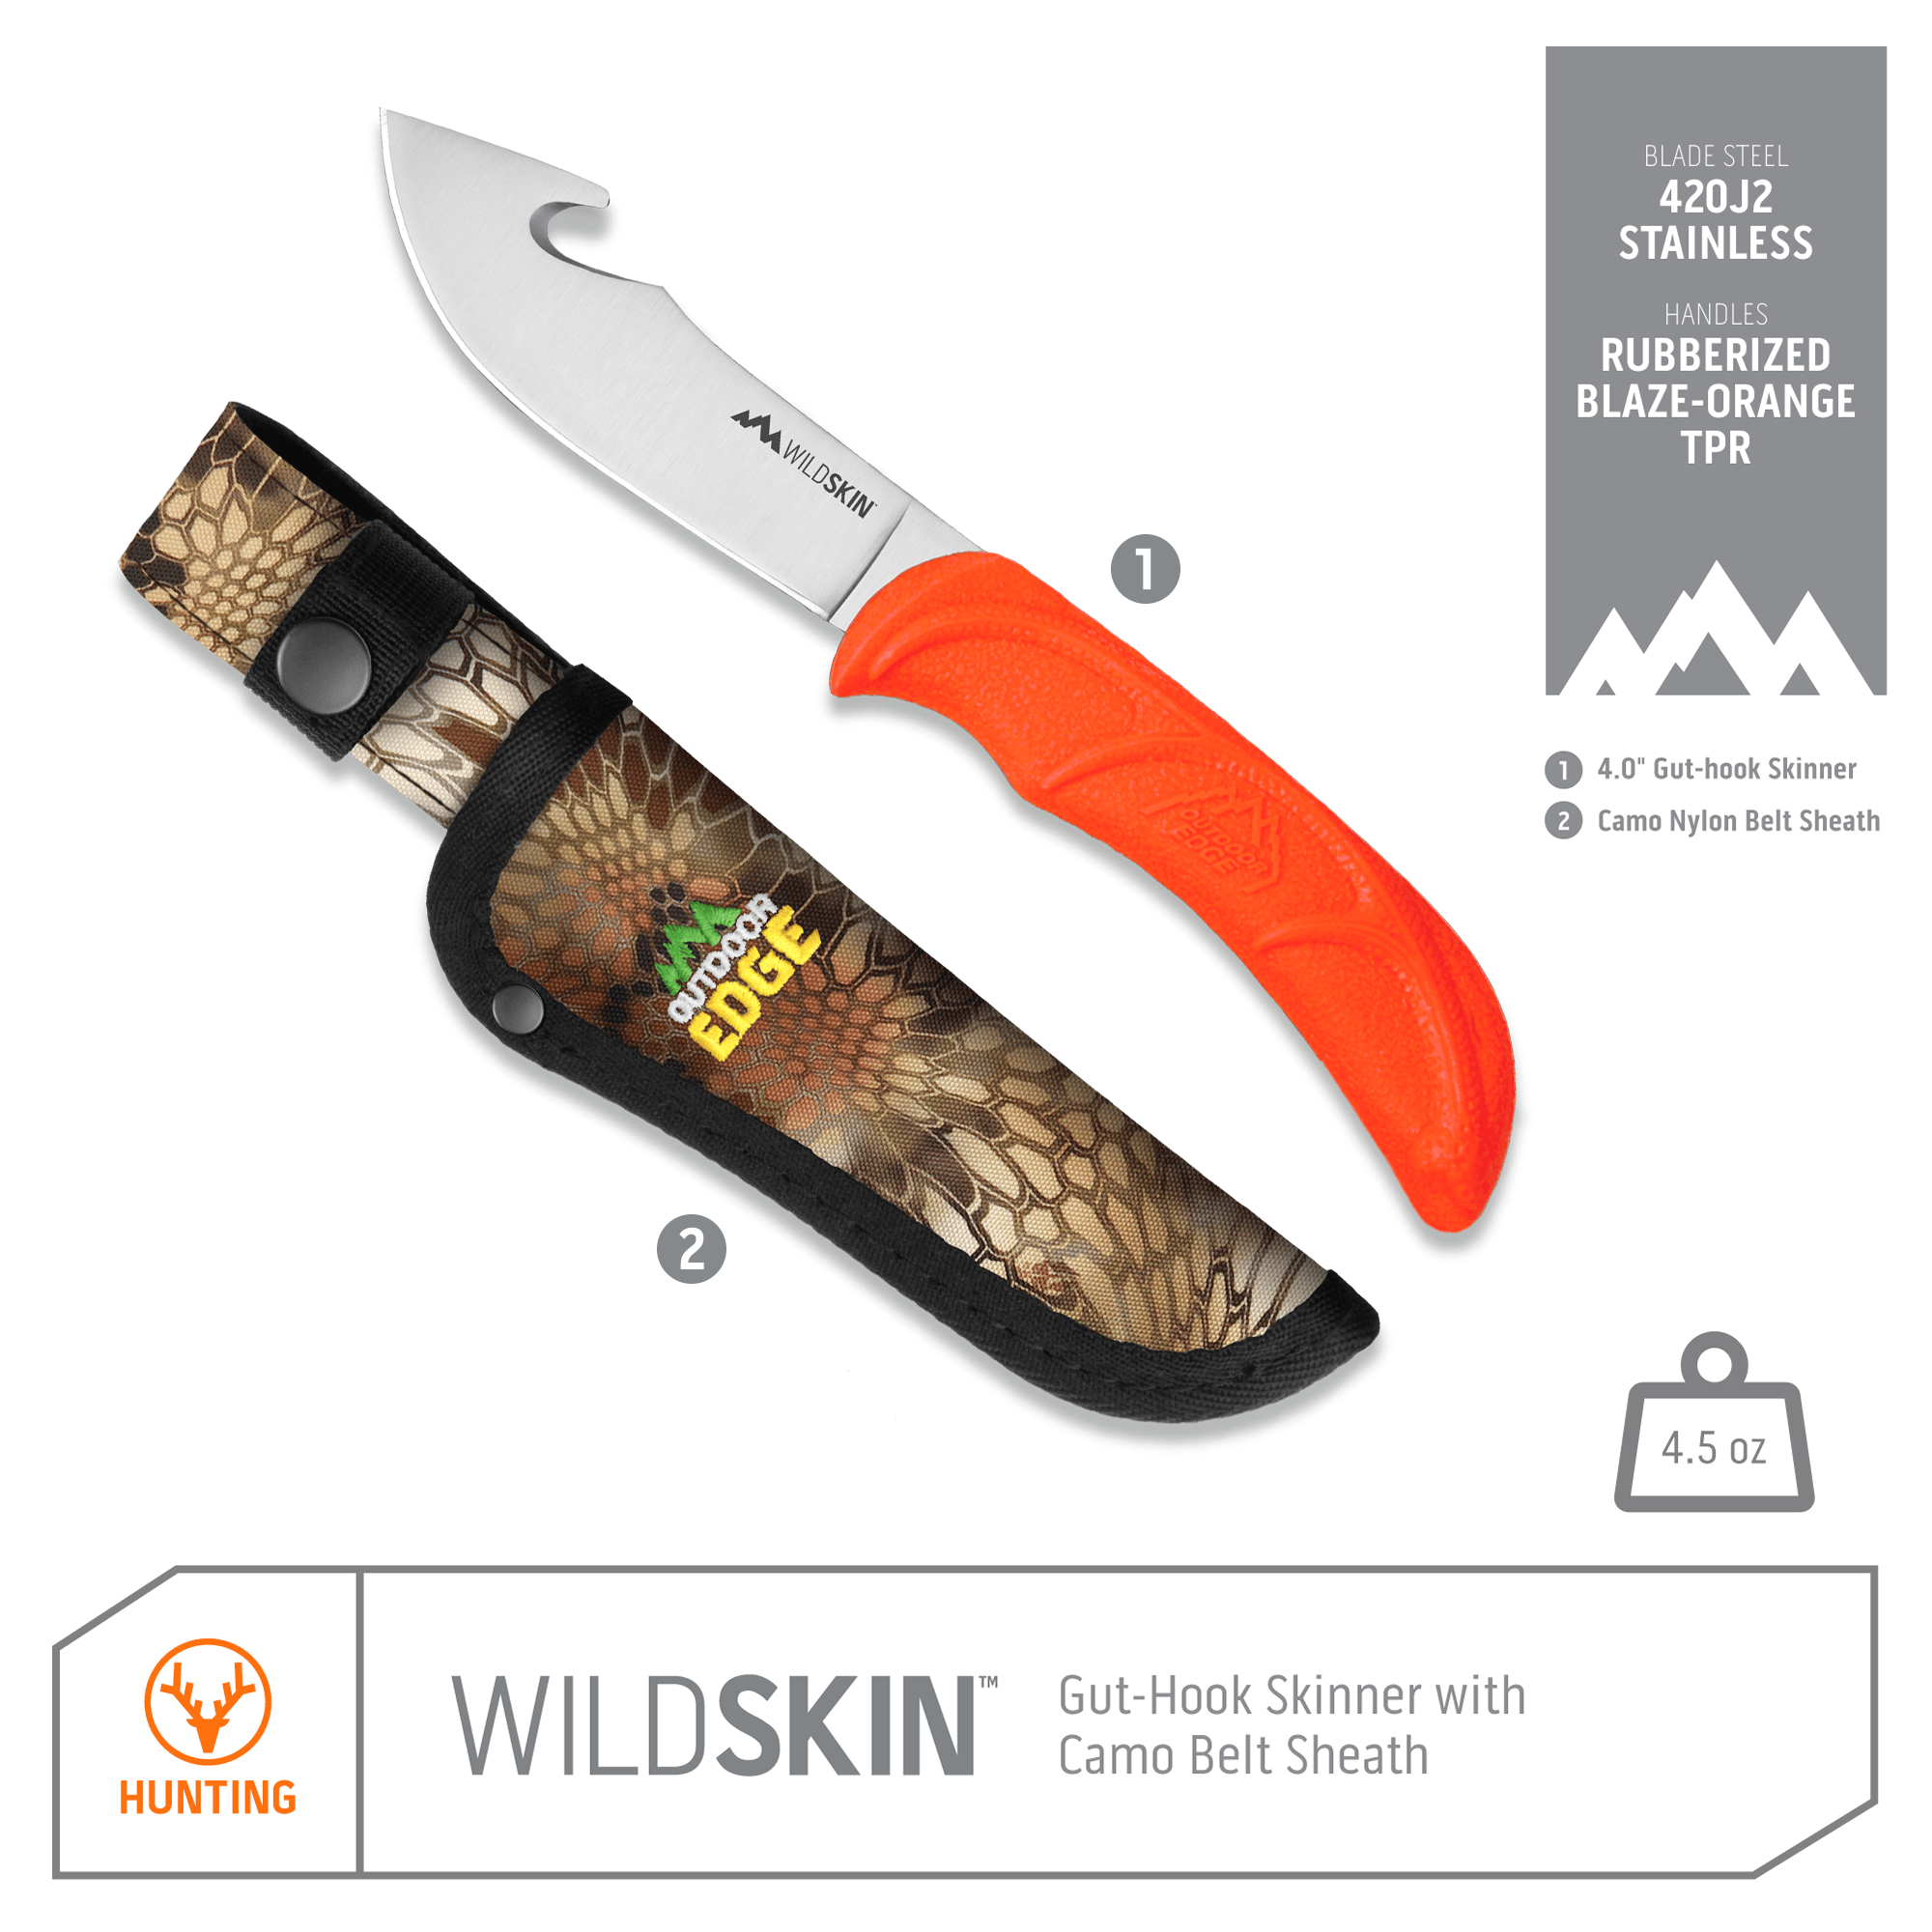 Outdoor Edge WildSkin Skinning Knife Product Photo with callouts for Gut-Hook Skinner and Belt Sheath.